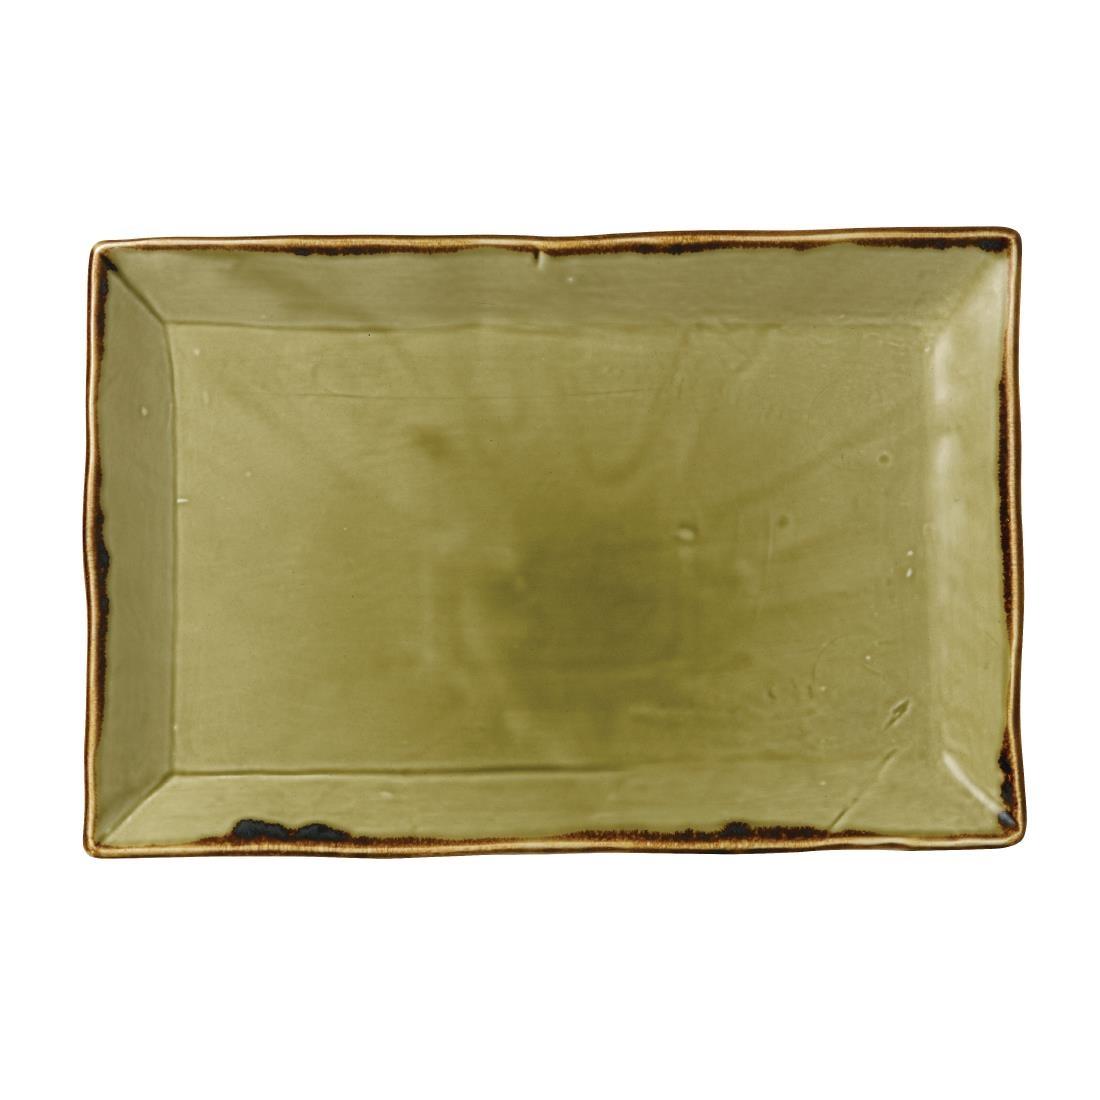 Dudson Harvest Rectangular Trays Green 230 x 336mm (Pack of 6) - FC052  - 1